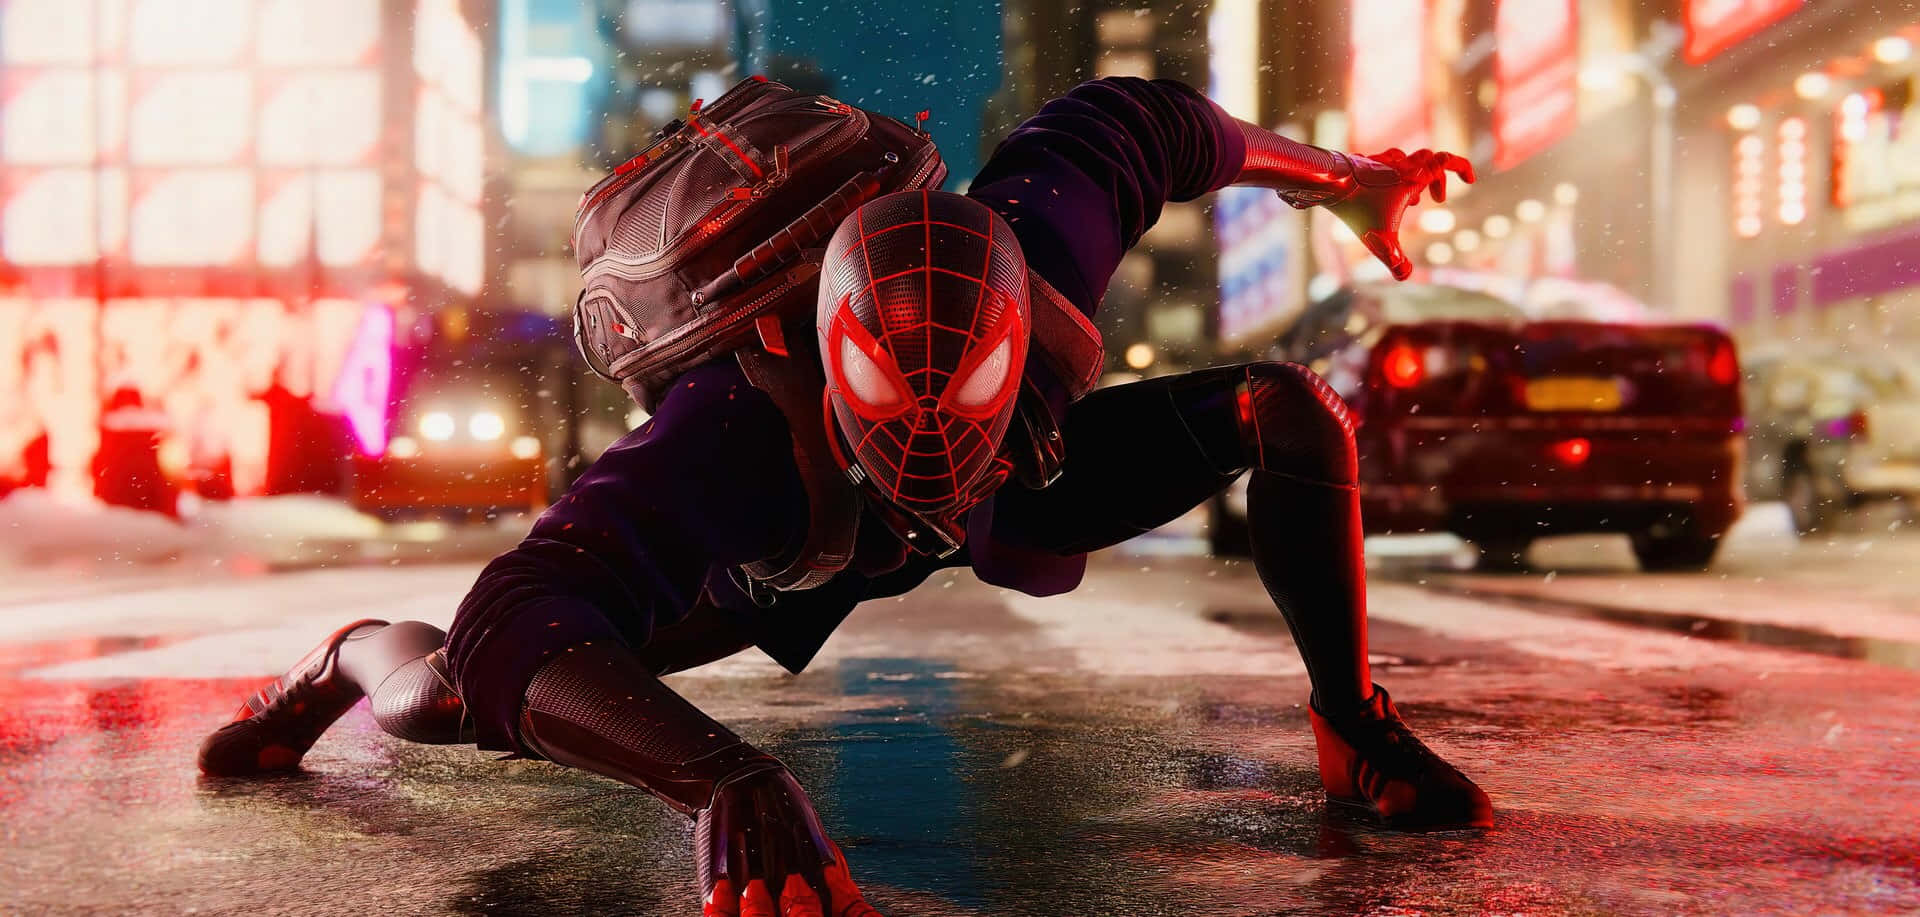 Miles Morales - A Spider-Man for the New Generation